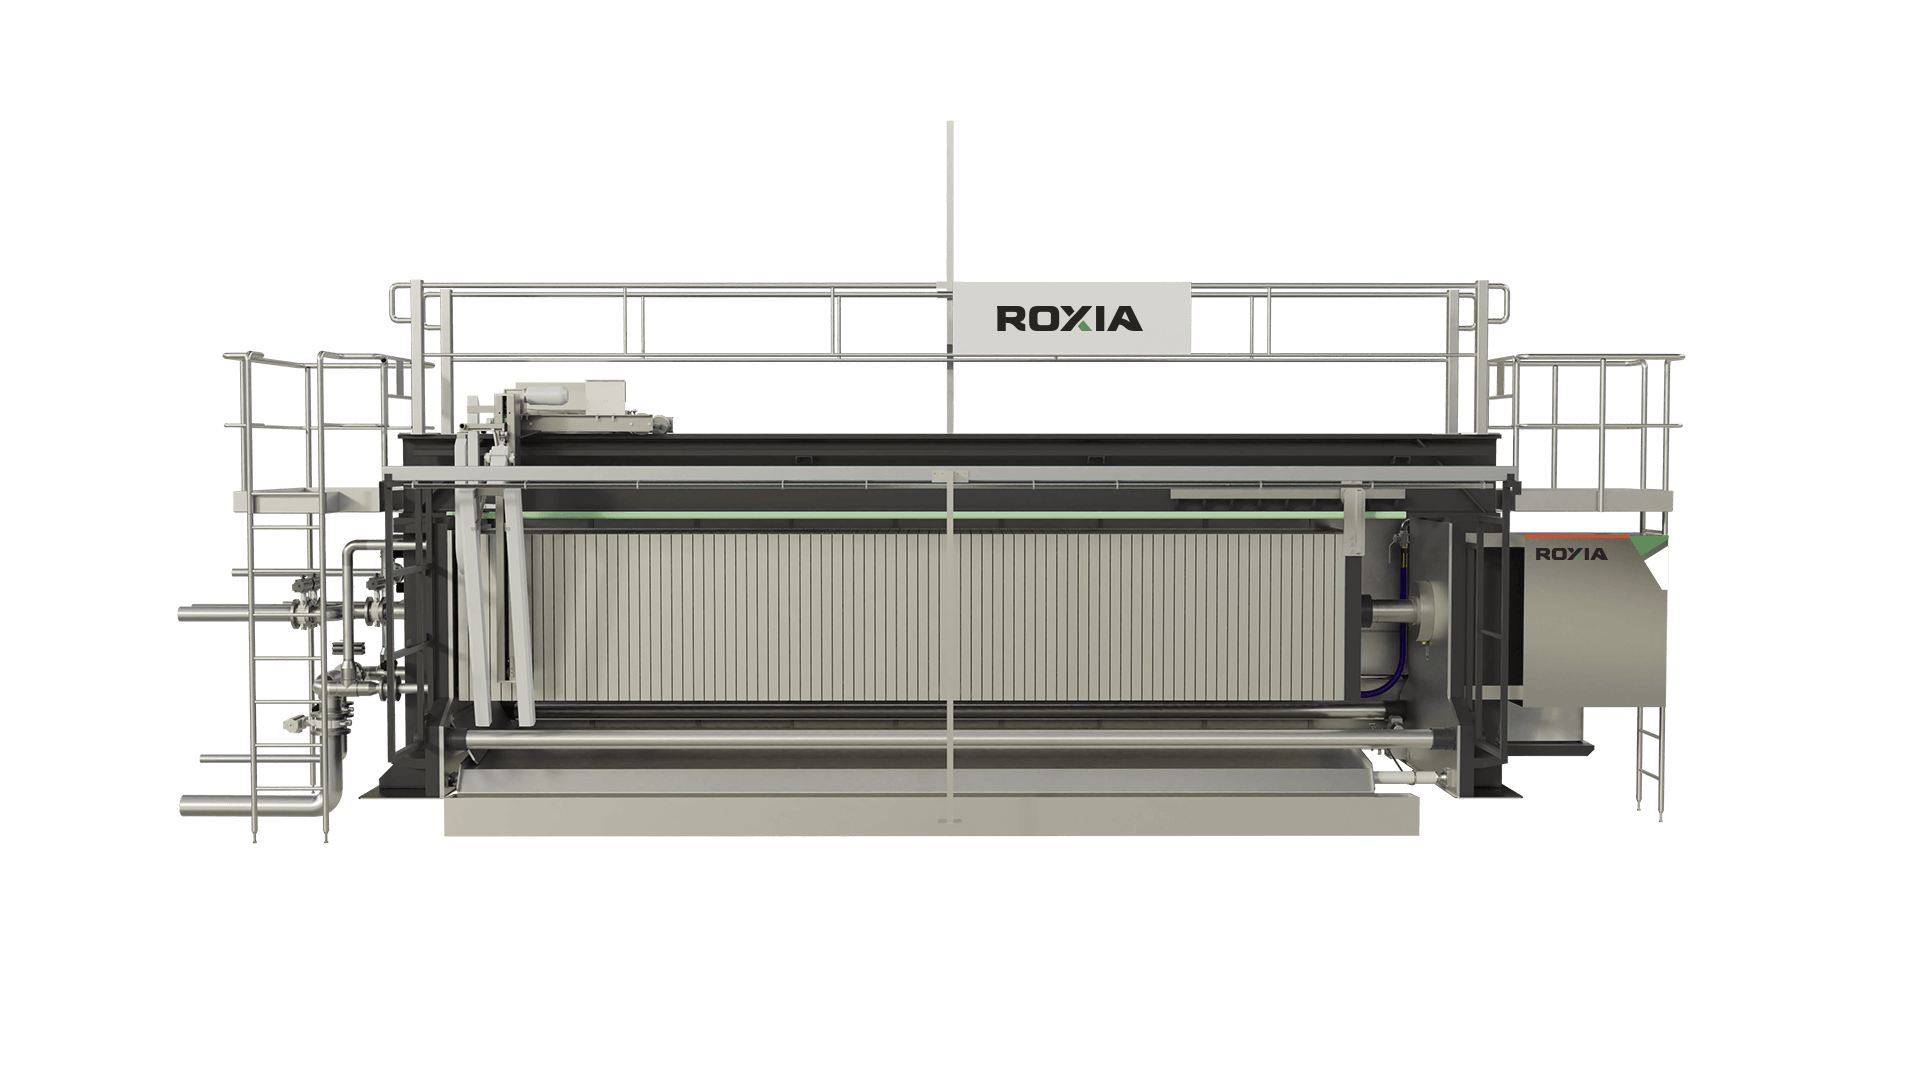 Roxia Filter Press (FP) has great process design which results in fully automatic operation.